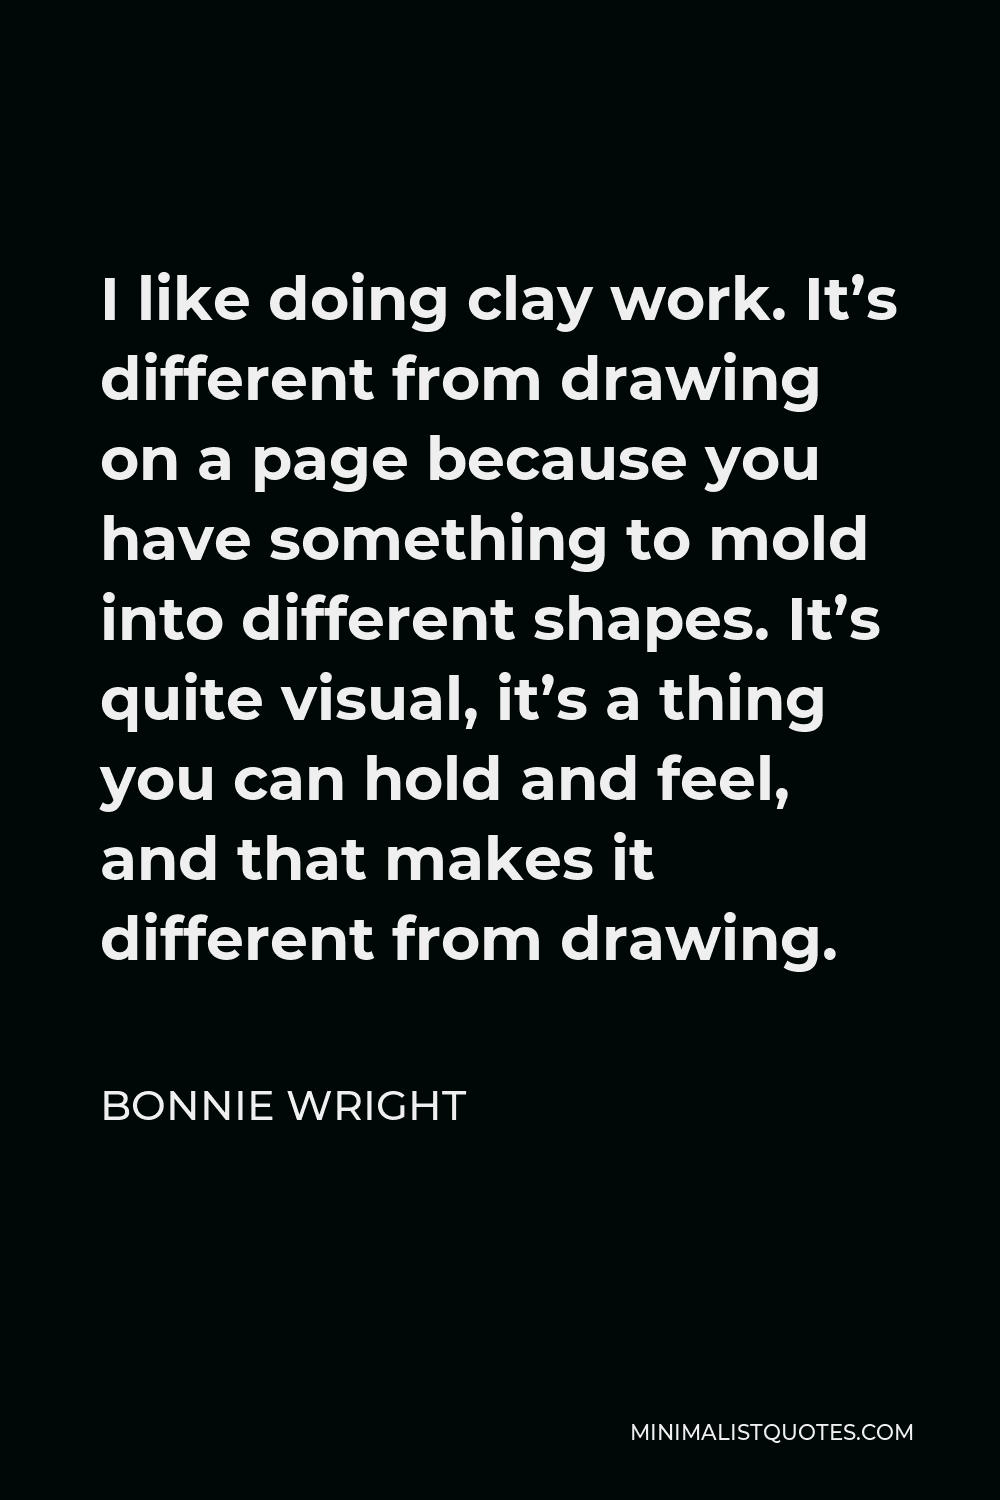 Bonnie Wright Quote - I like doing clay work. It’s different from drawing on a page because you have something to mold into different shapes. It’s quite visual, it’s a thing you can hold and feel, and that makes it different from drawing.